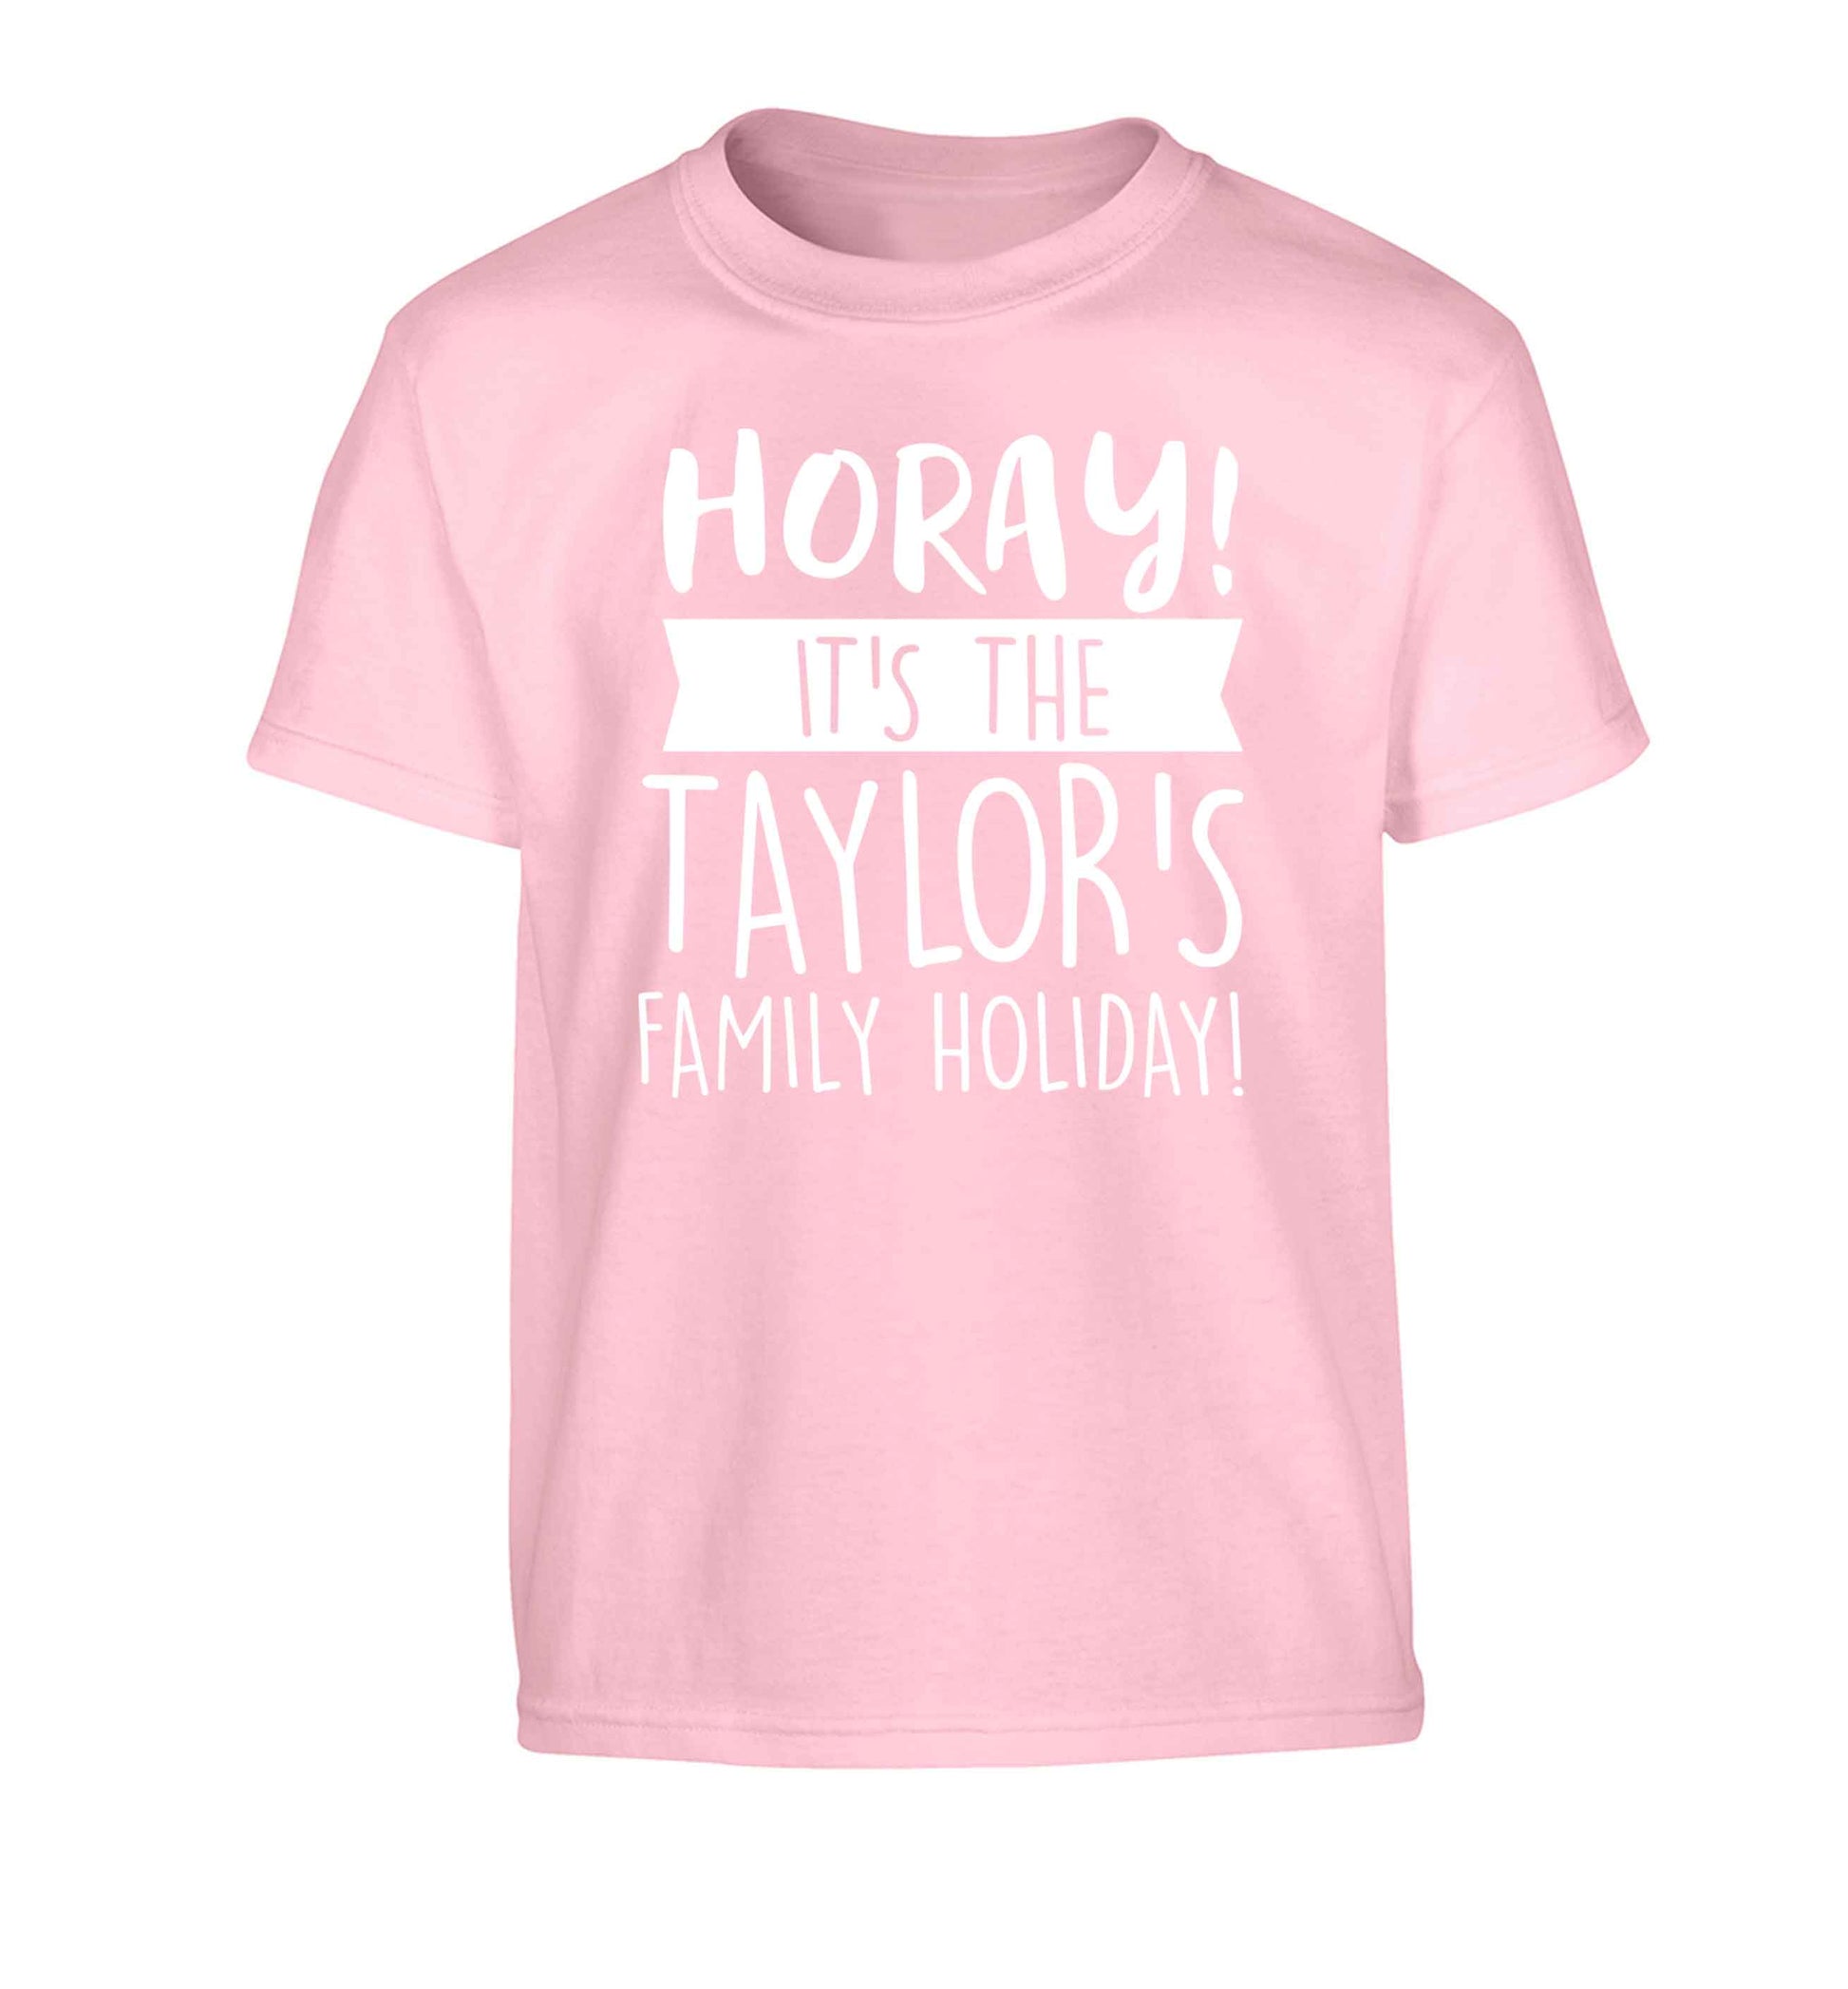 Horay it's the Taylor's family holiday! personalised item Children's light pink Tshirt 12-13 Years